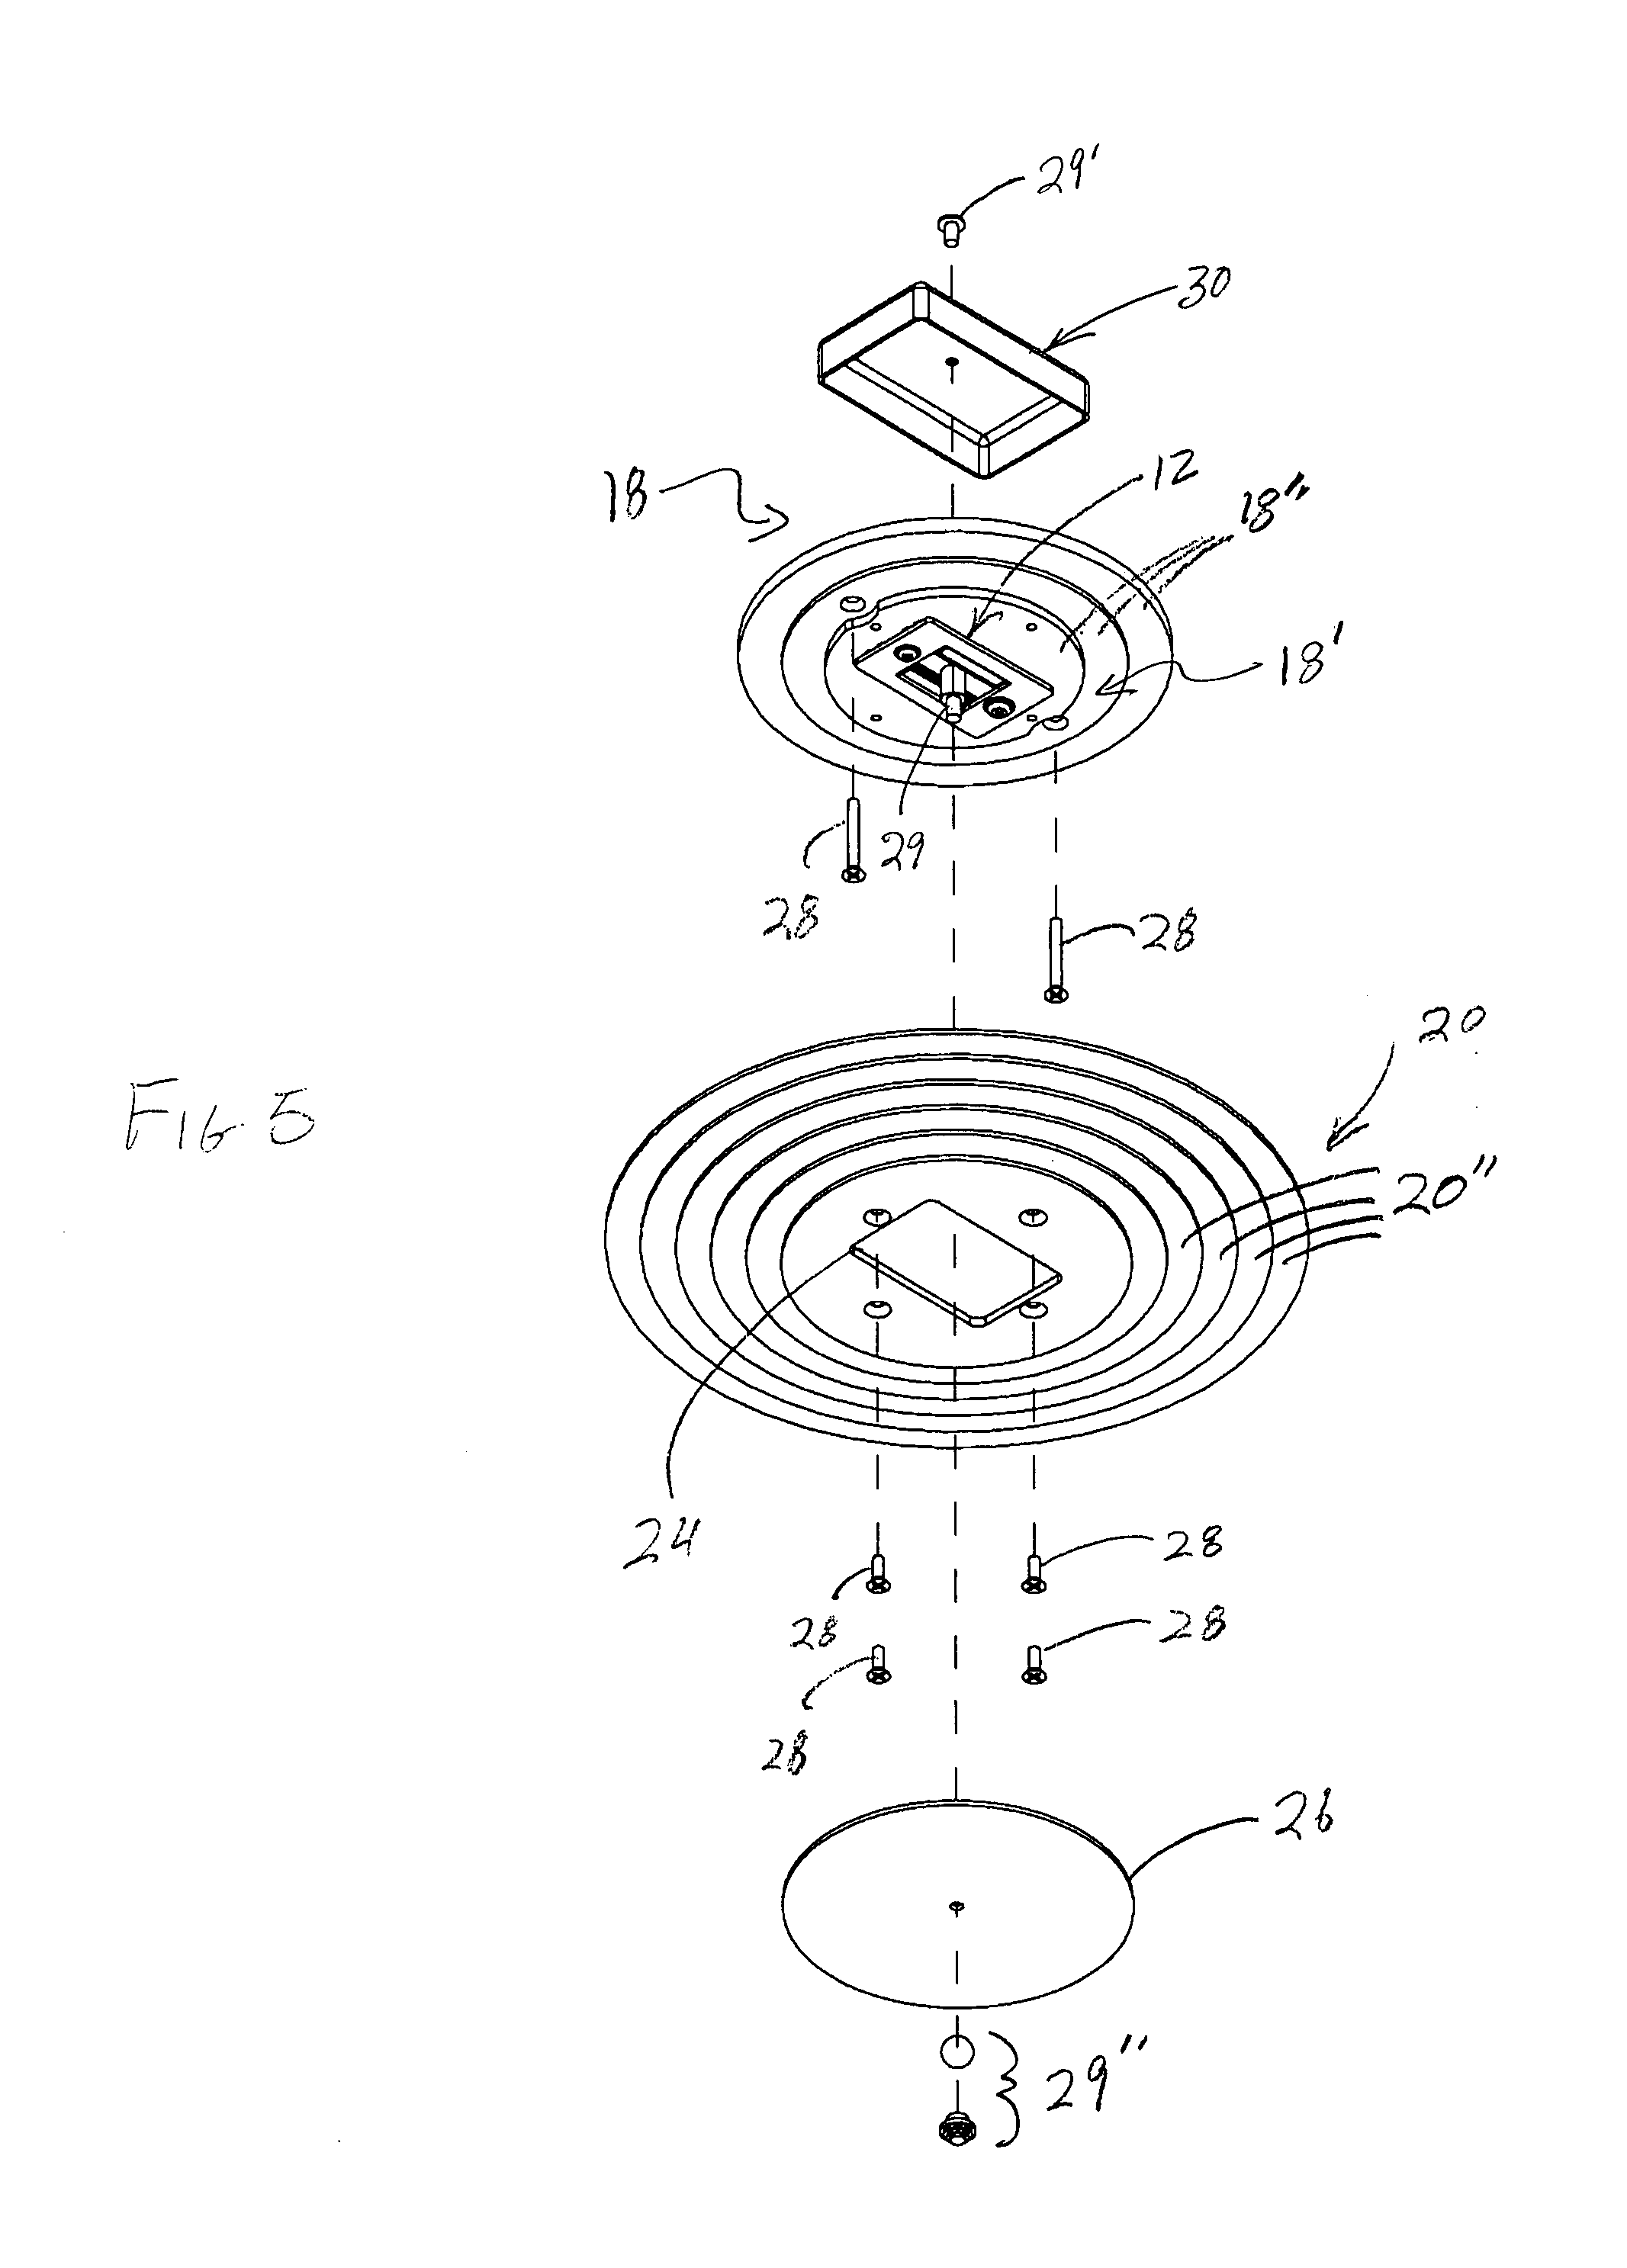 Light fixture assembly having improved heat dissipation capabilities